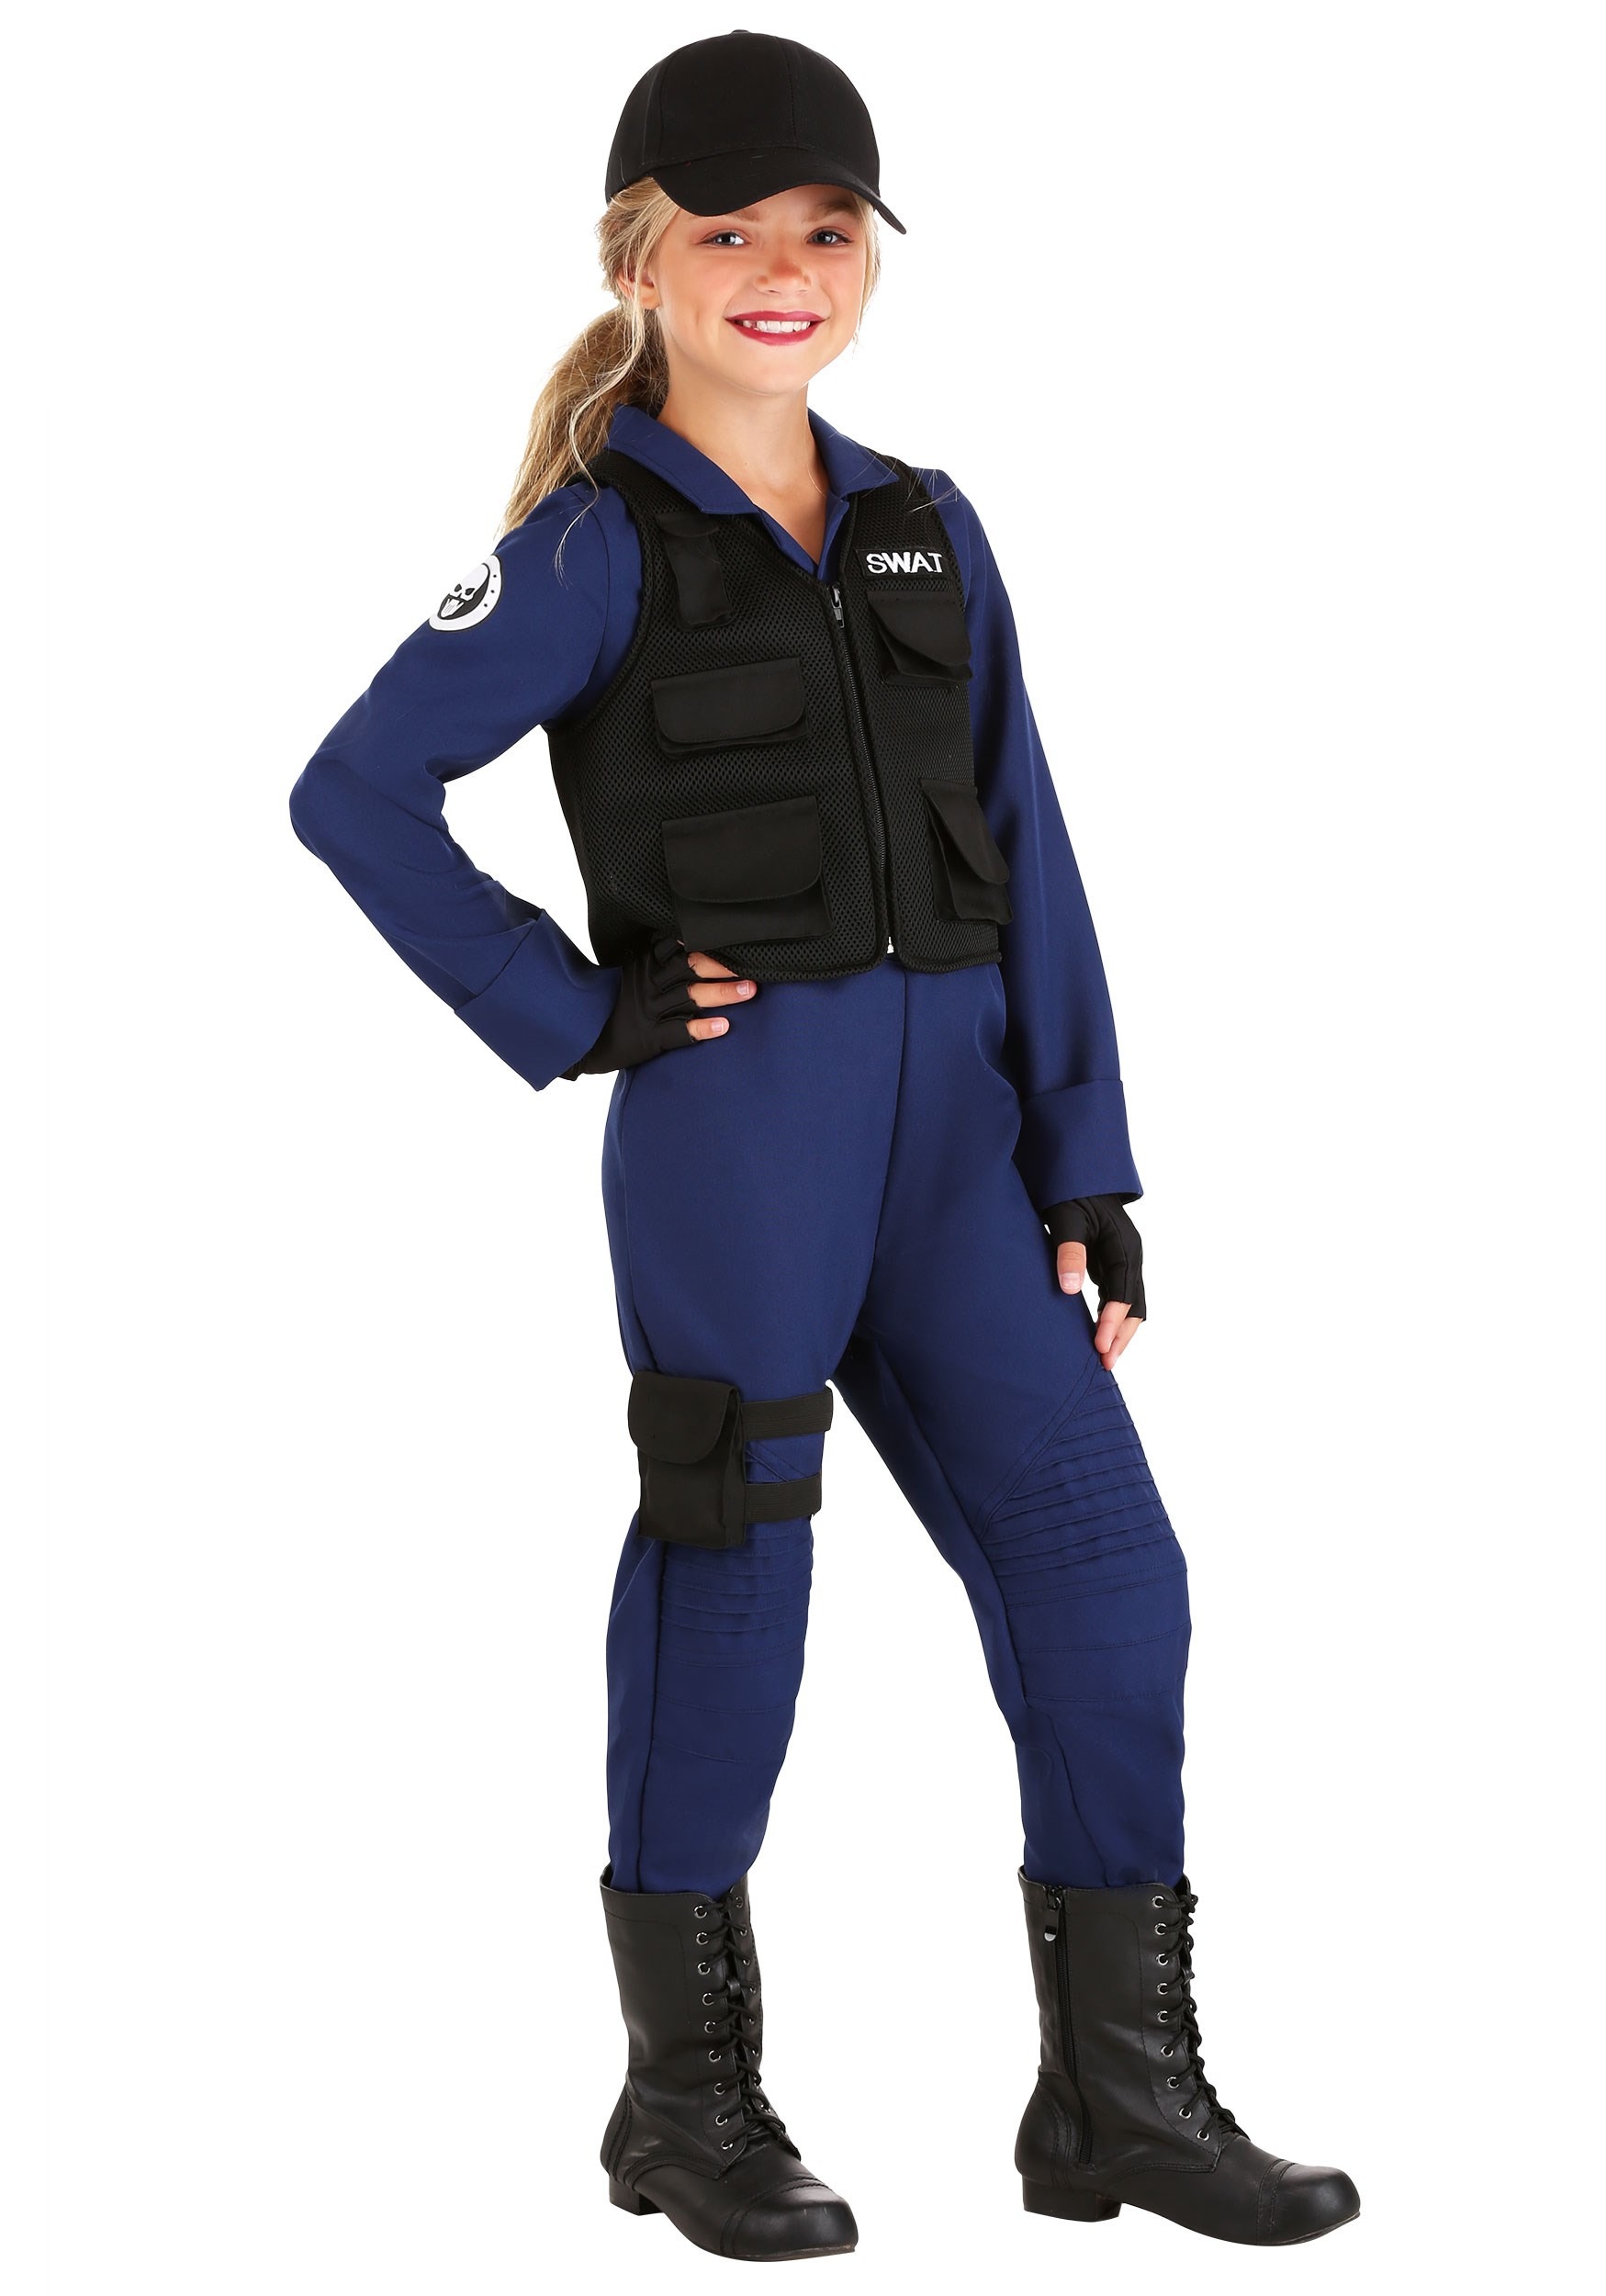 Police SWAT Costume for Girls